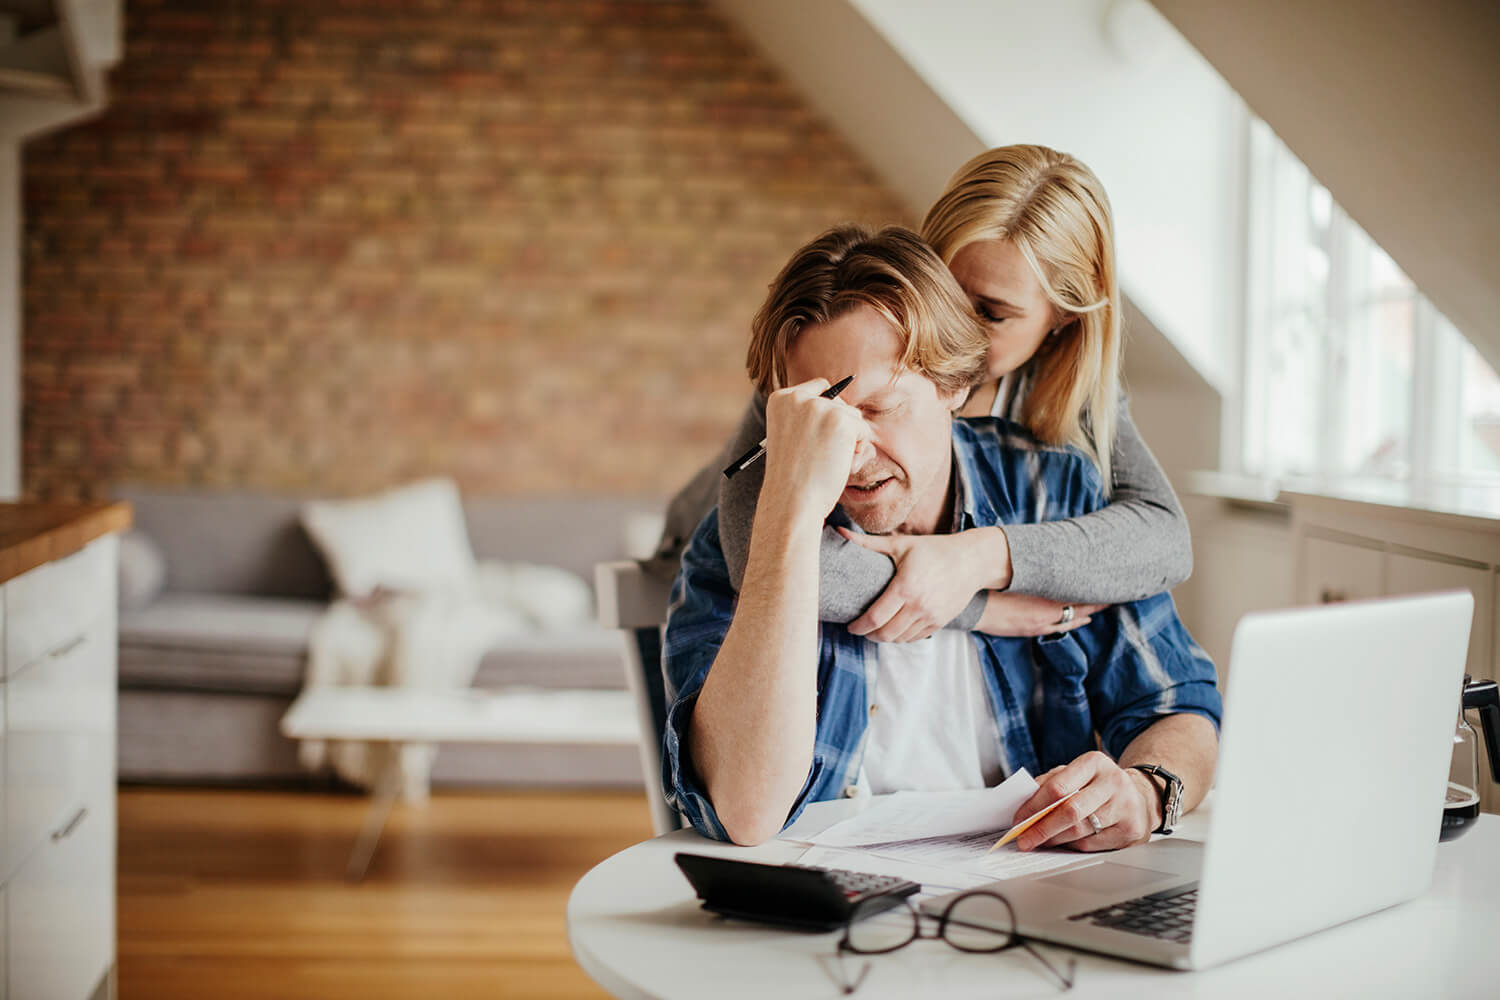 Frustrated, a man sitting at a table with a laptop and papers rubs his eyes while a woman hugs him. If you're denied Social Security Disability in Alabama, you can appeal the decision.